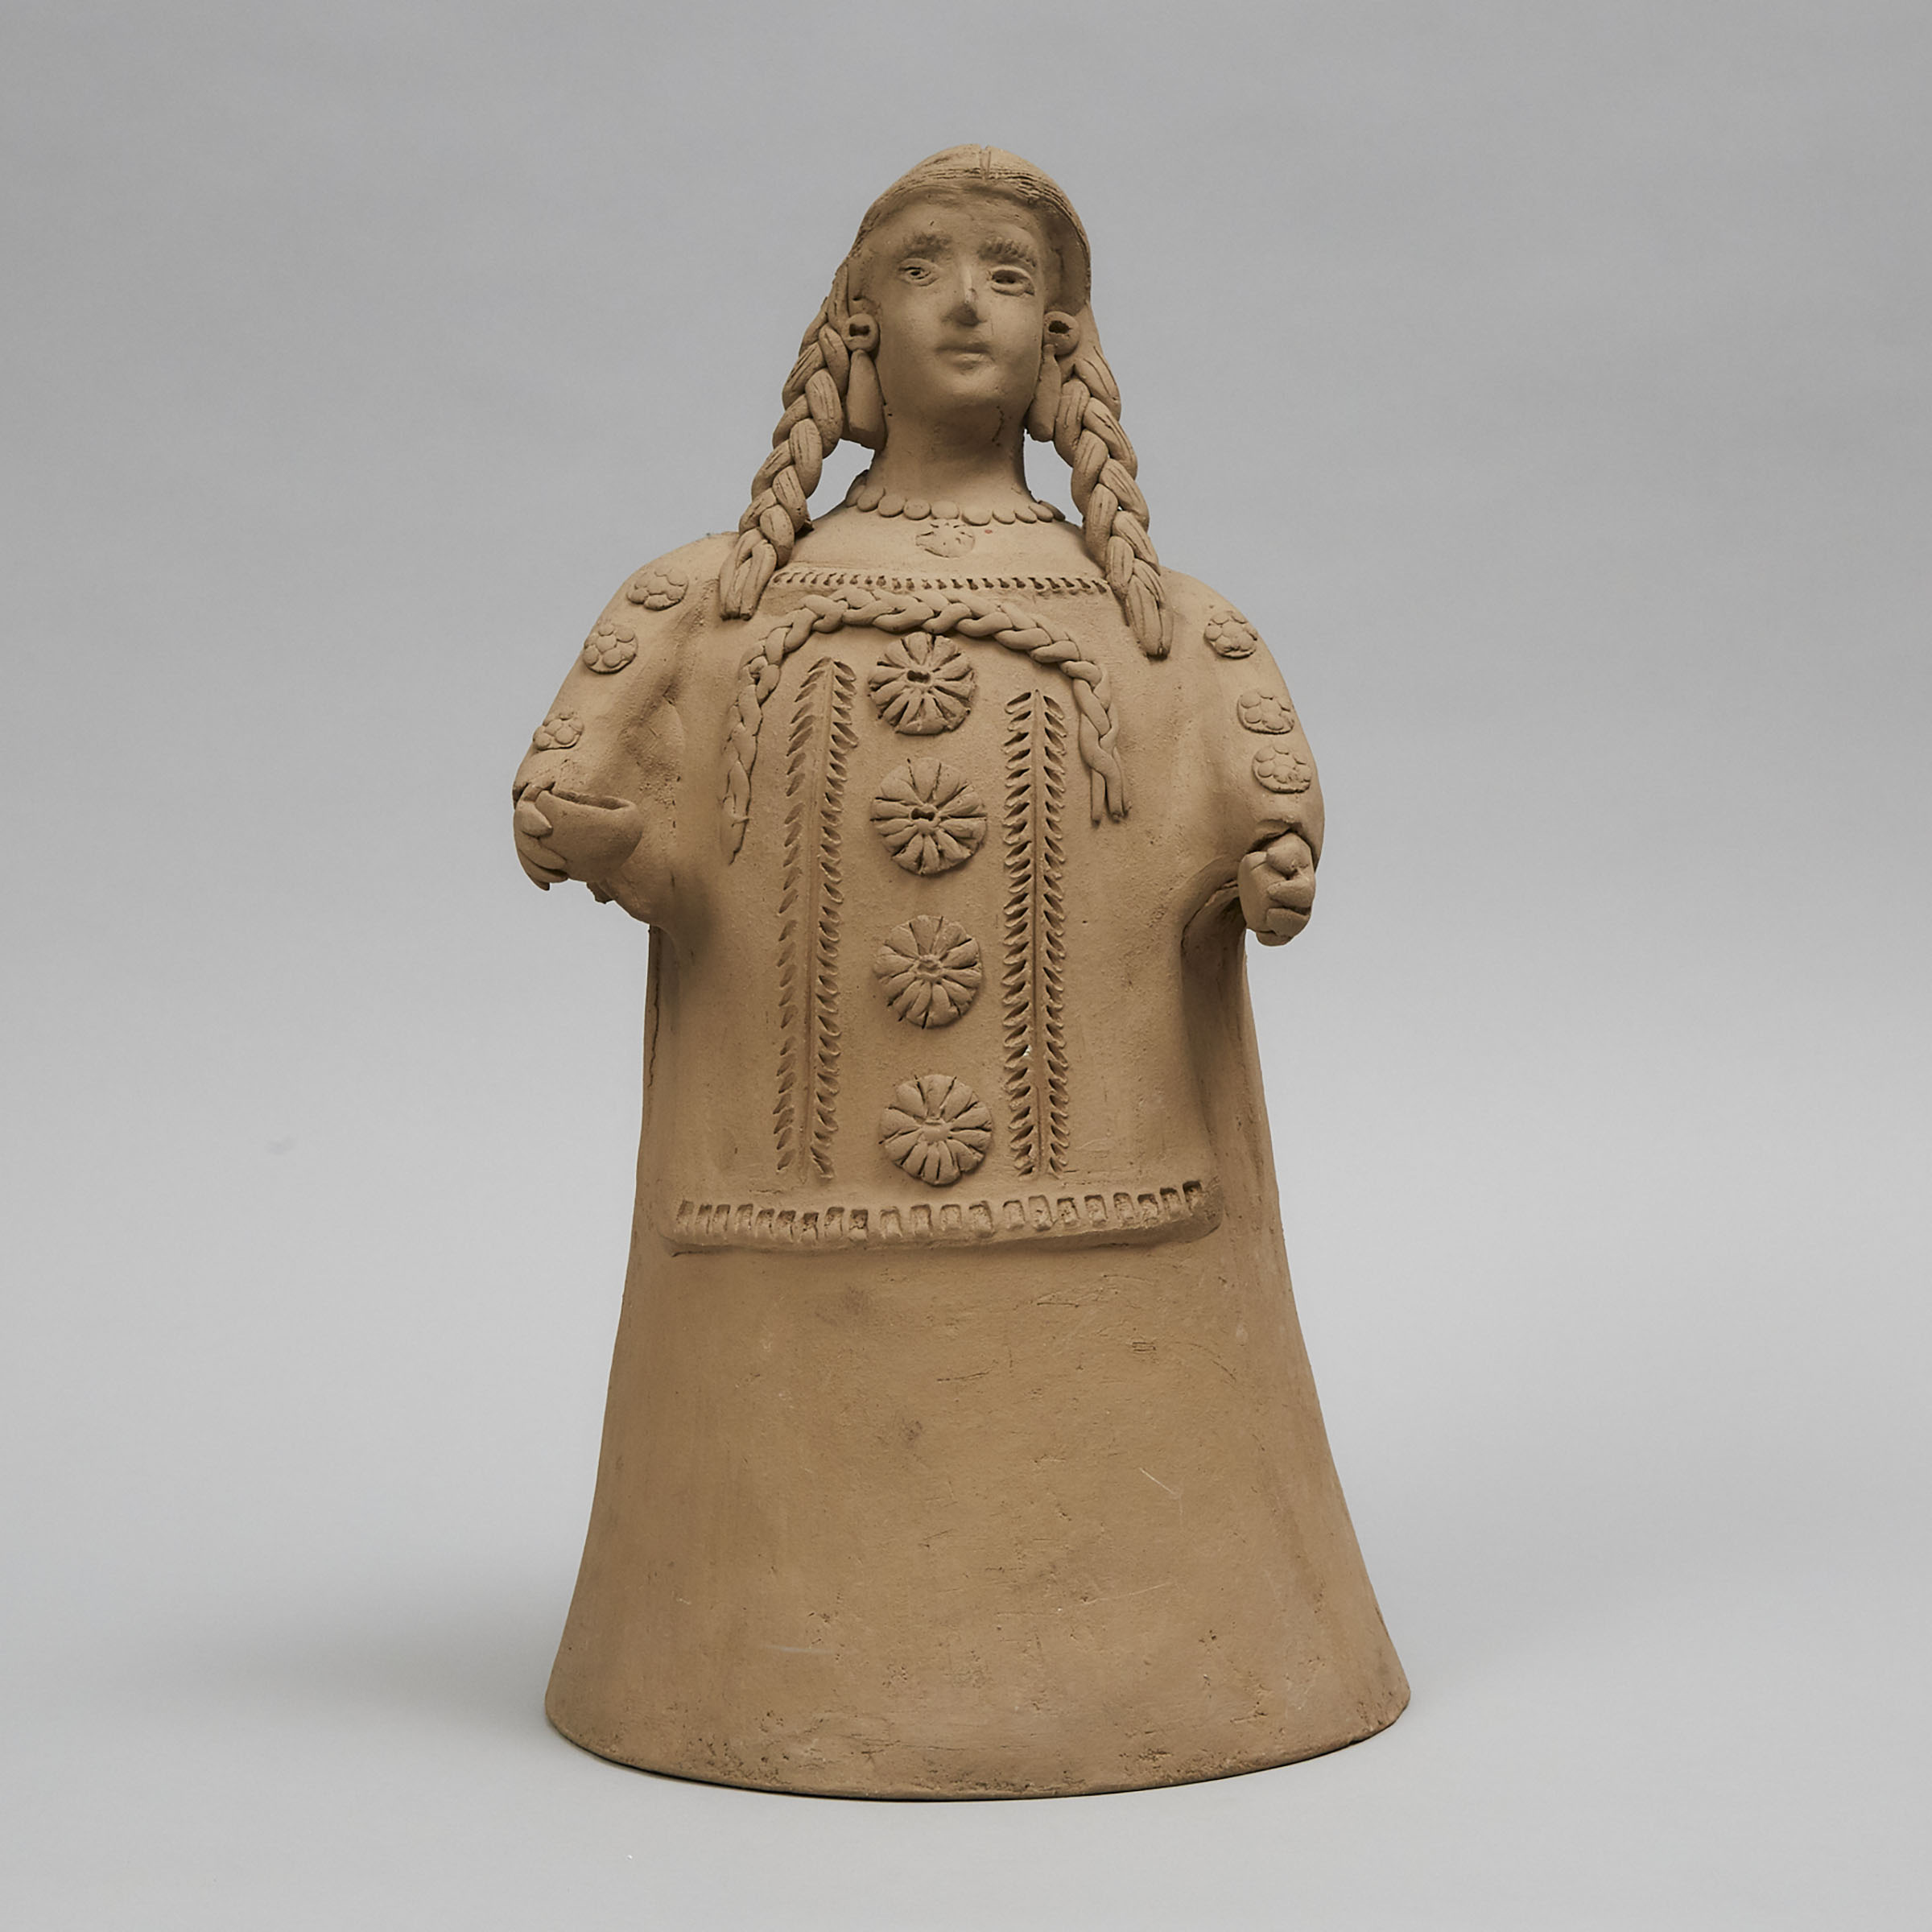 Large Contemporary Pottery Figure of a Woman Holding Covered Cup, Arrazola (Oaxaca), Mexico, late 20th century